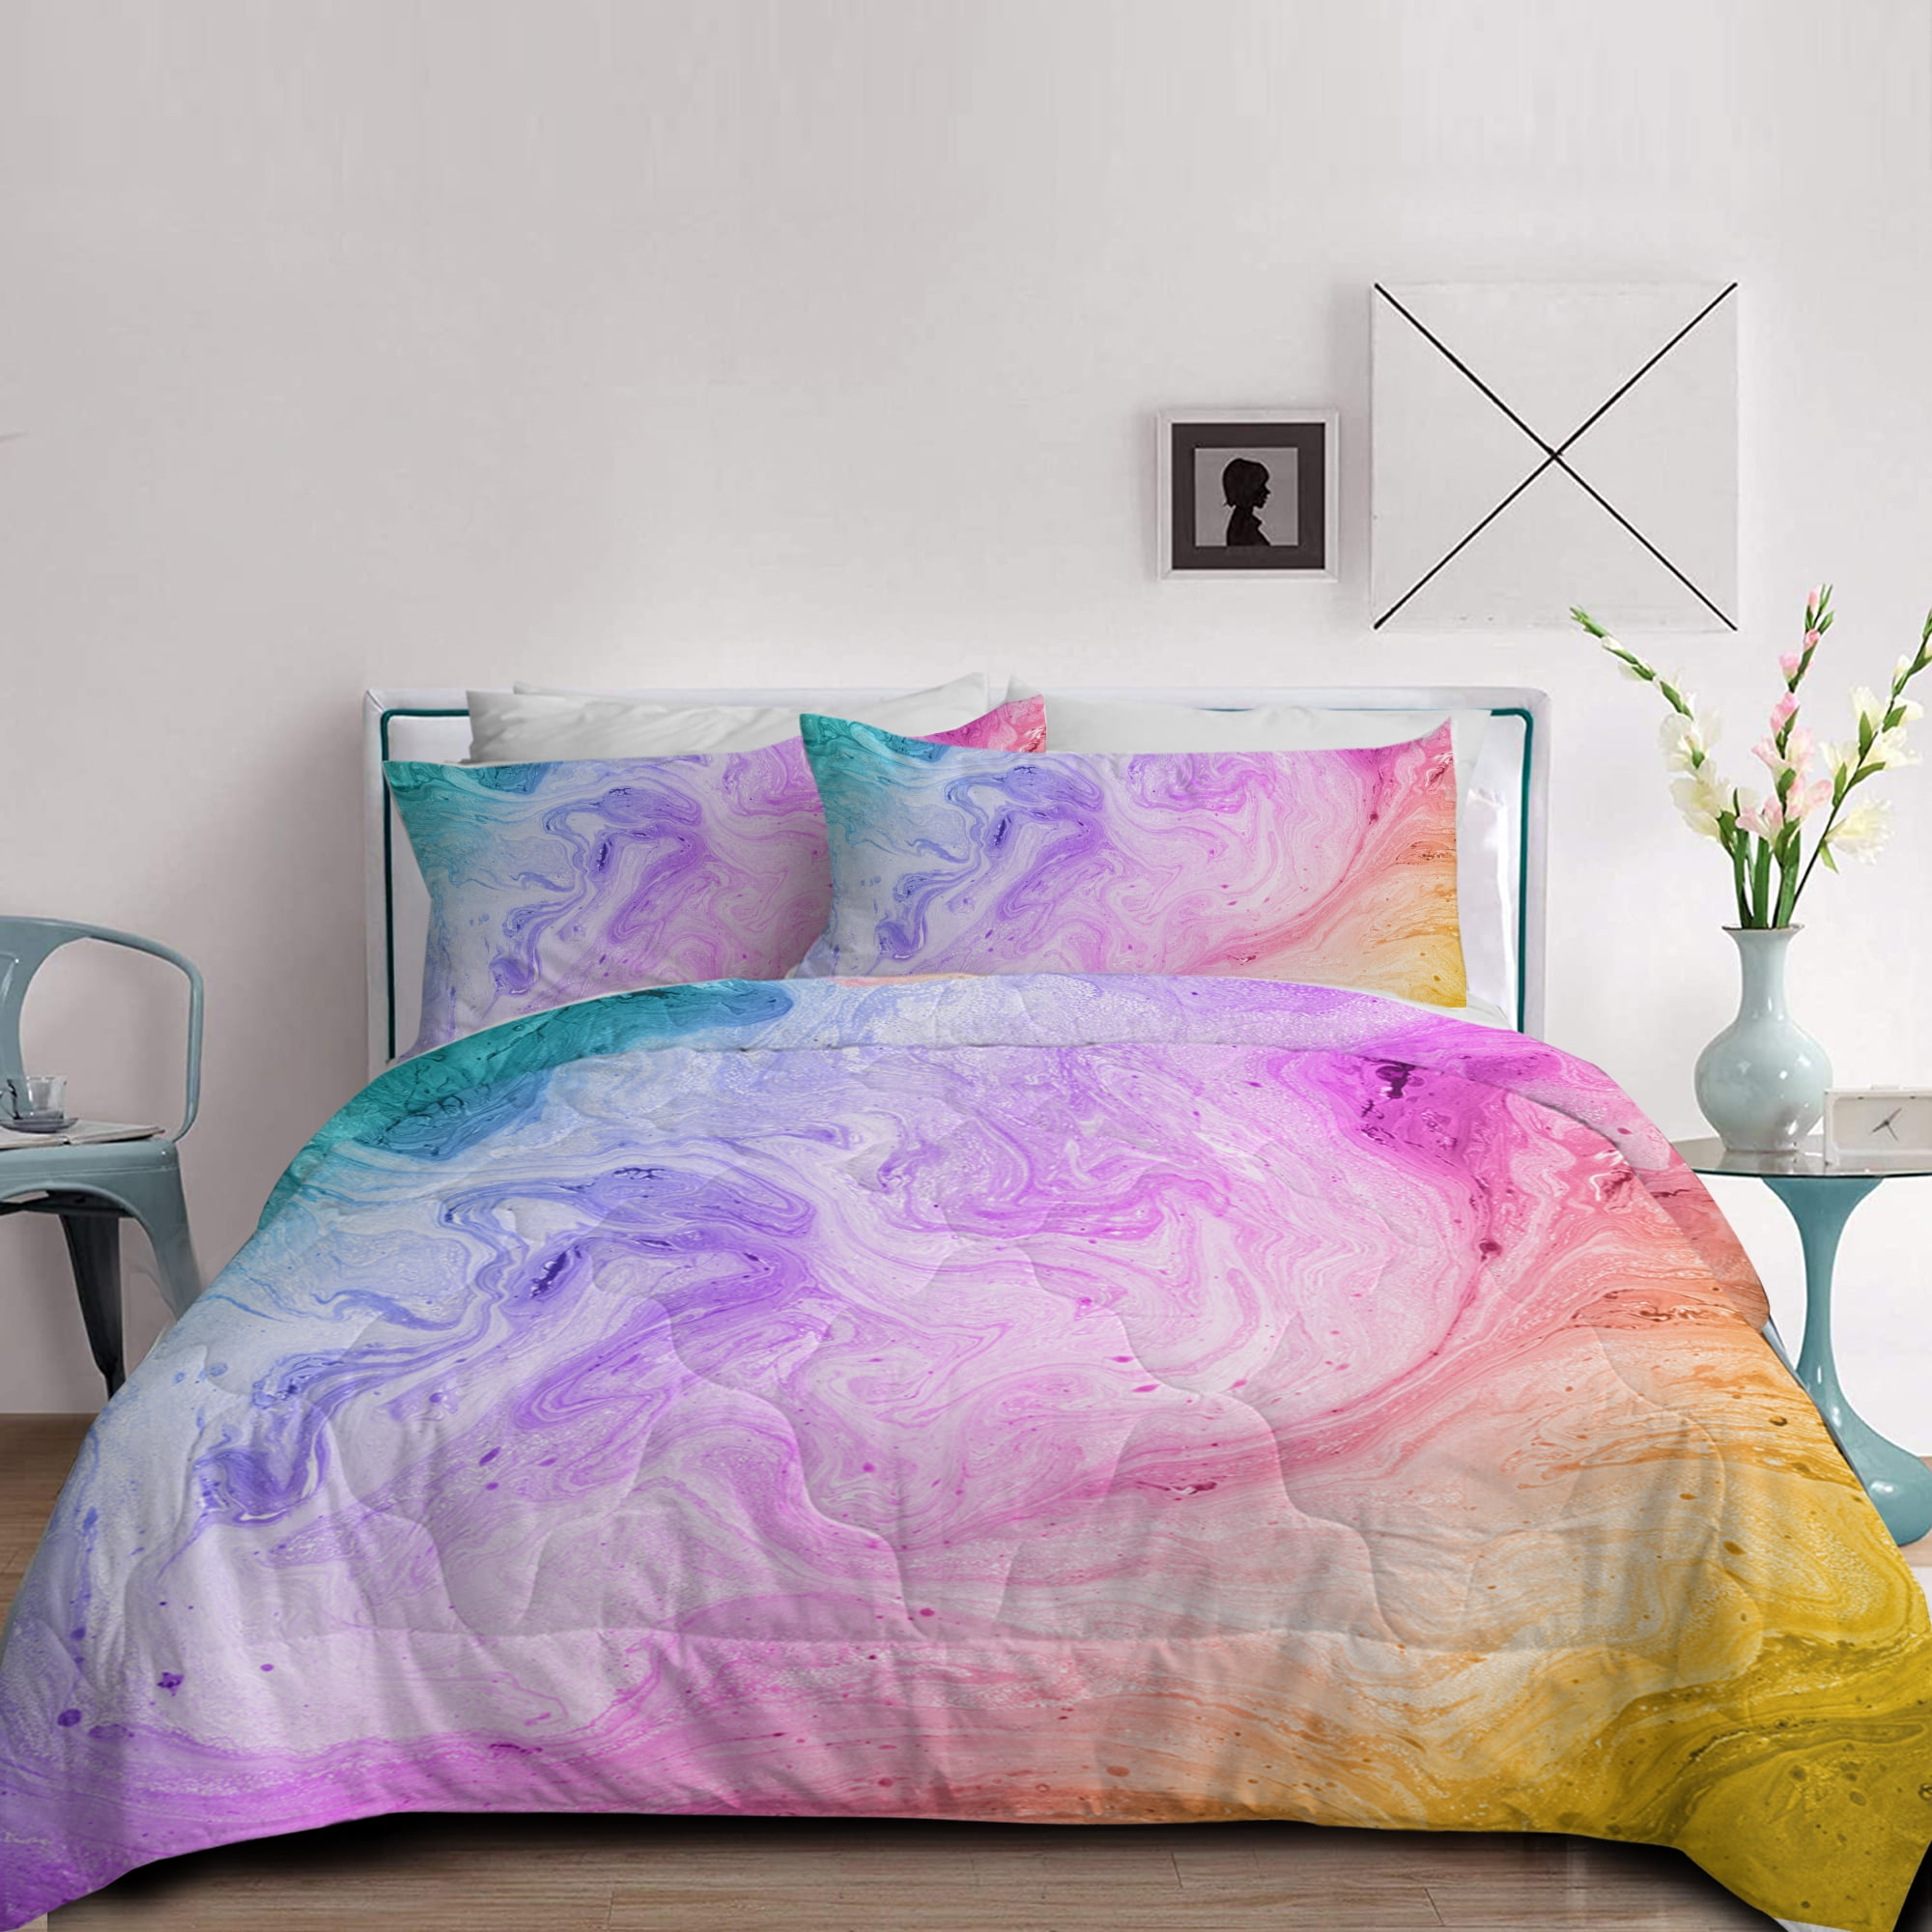 Twin BlessLiving Colorful Marble Bedding Pastel Pink Blue Purple Duvet Cover Set Marble Abstract Art Bed Set 3 Piece Bright Girly Bedspreads 